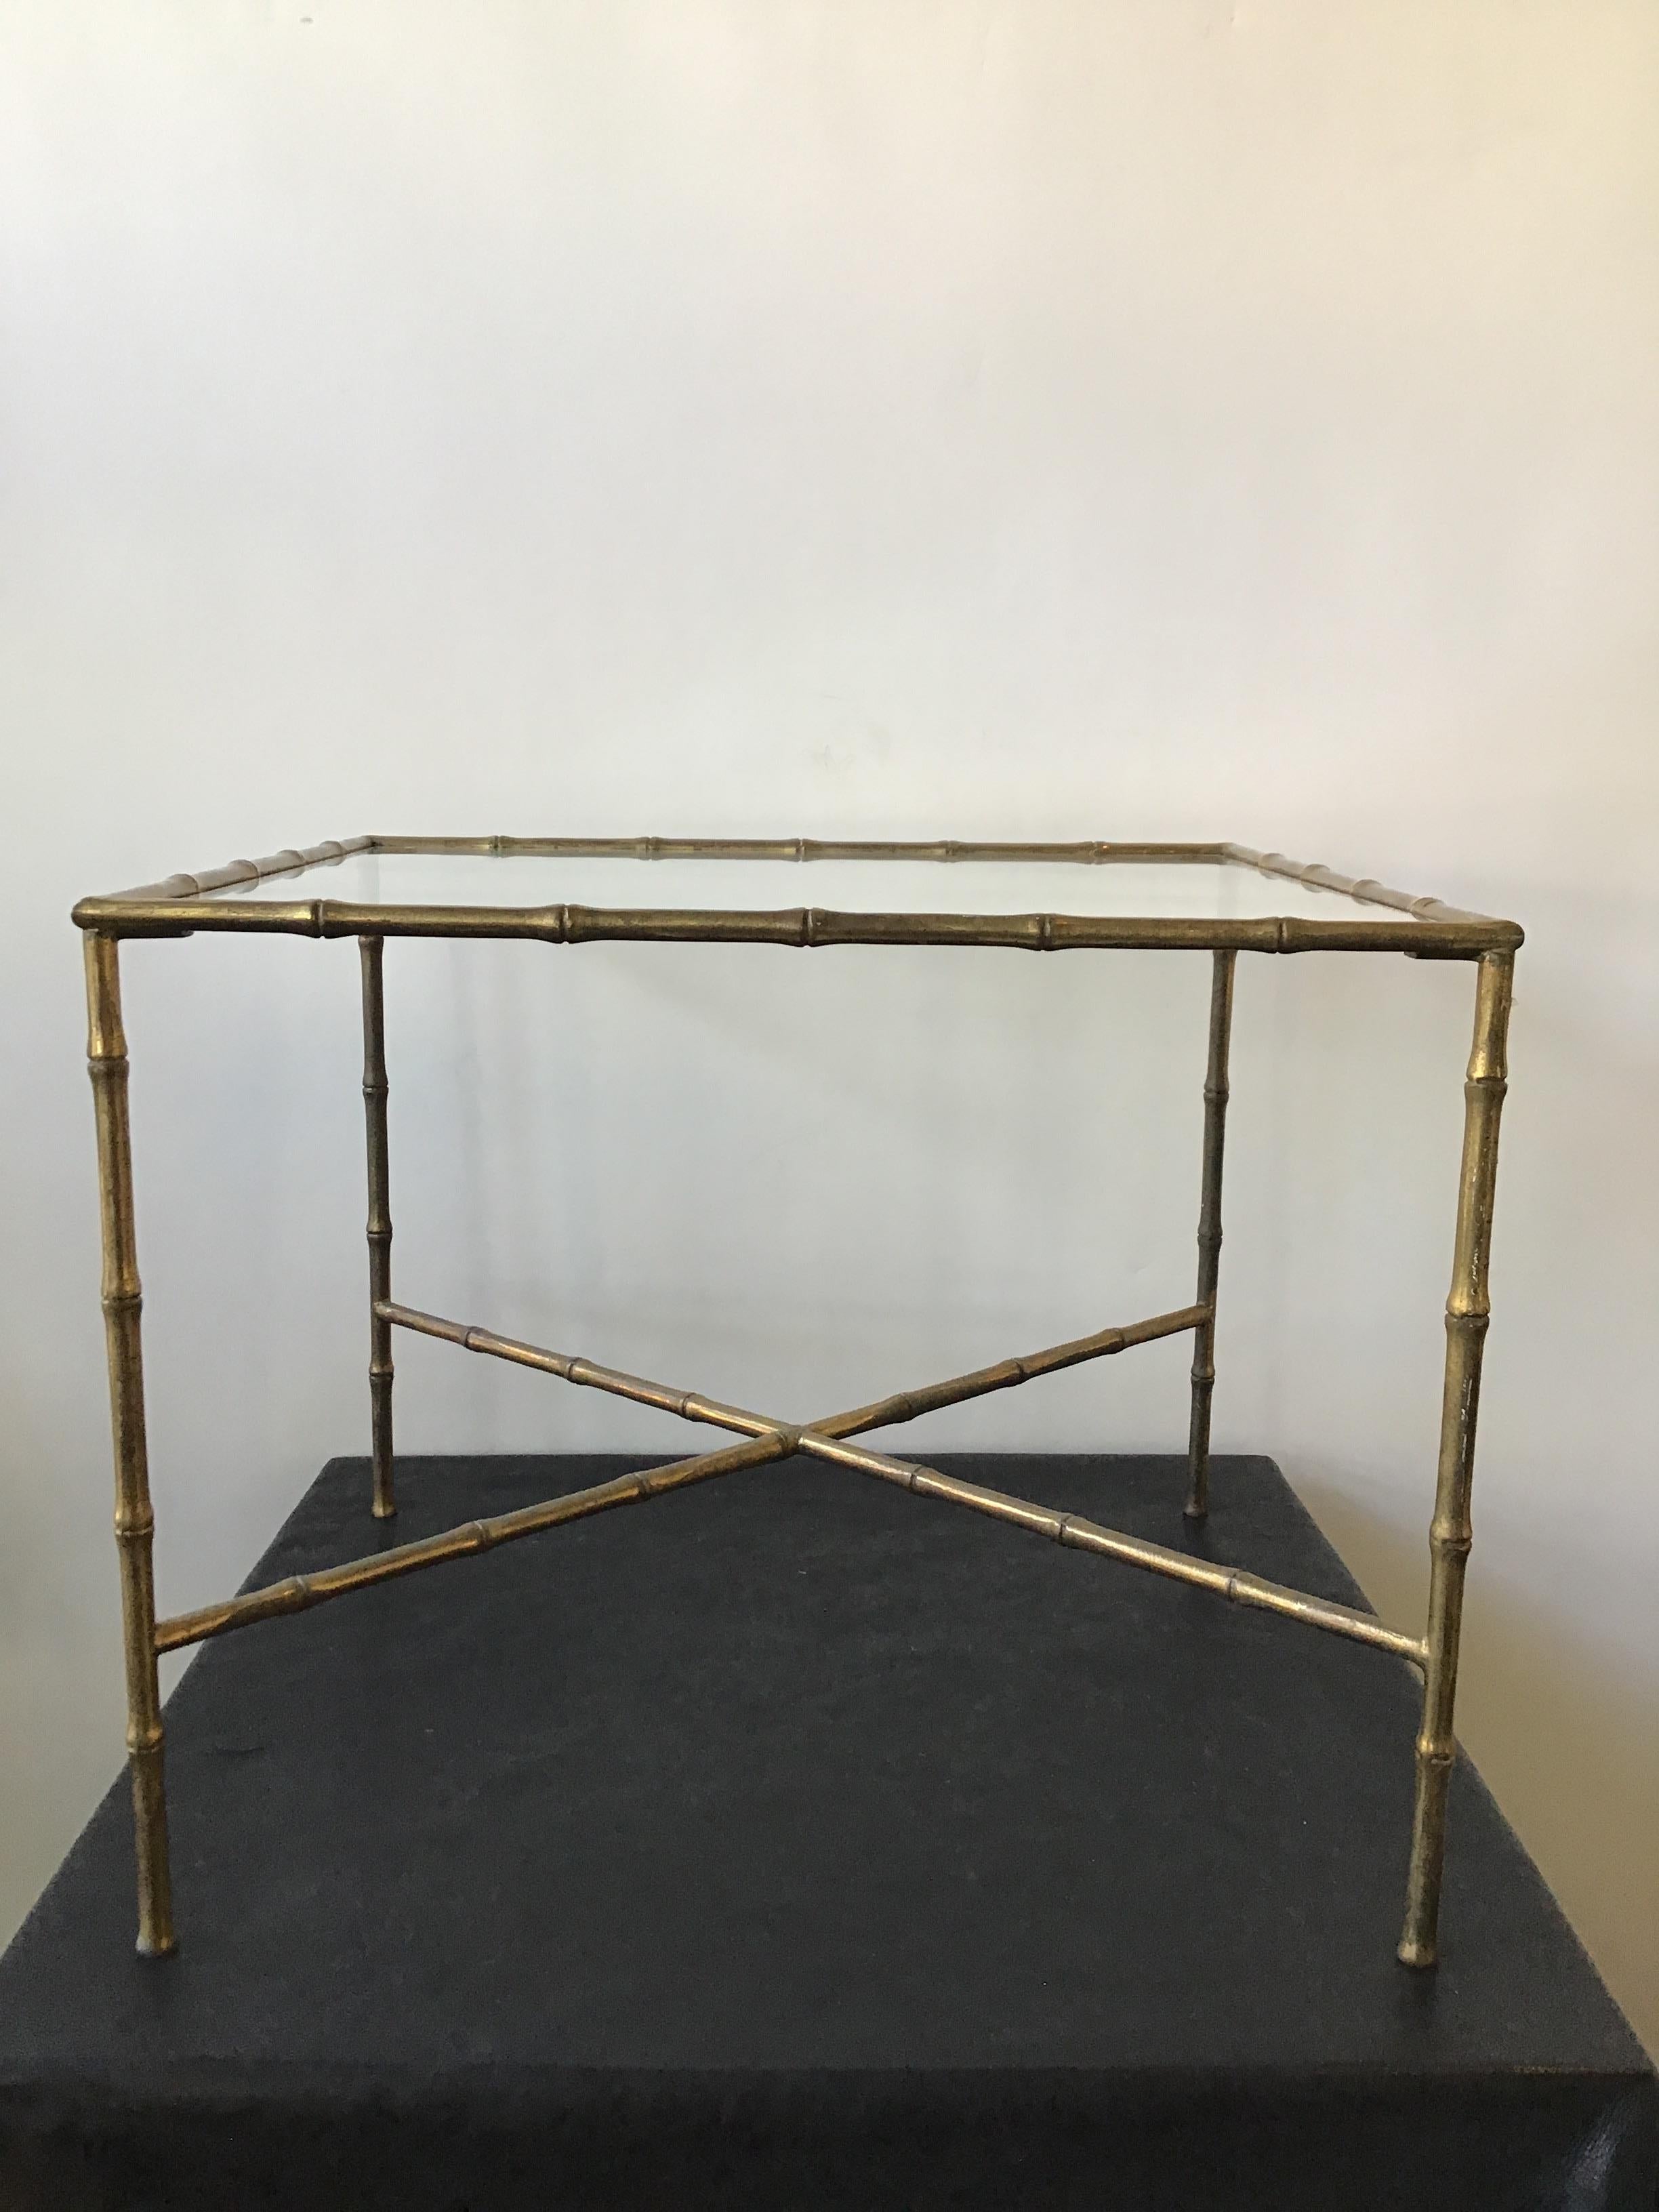 1960s Italian faux bamboo brass accent table with glass top.
This table can be shipped by UPS.